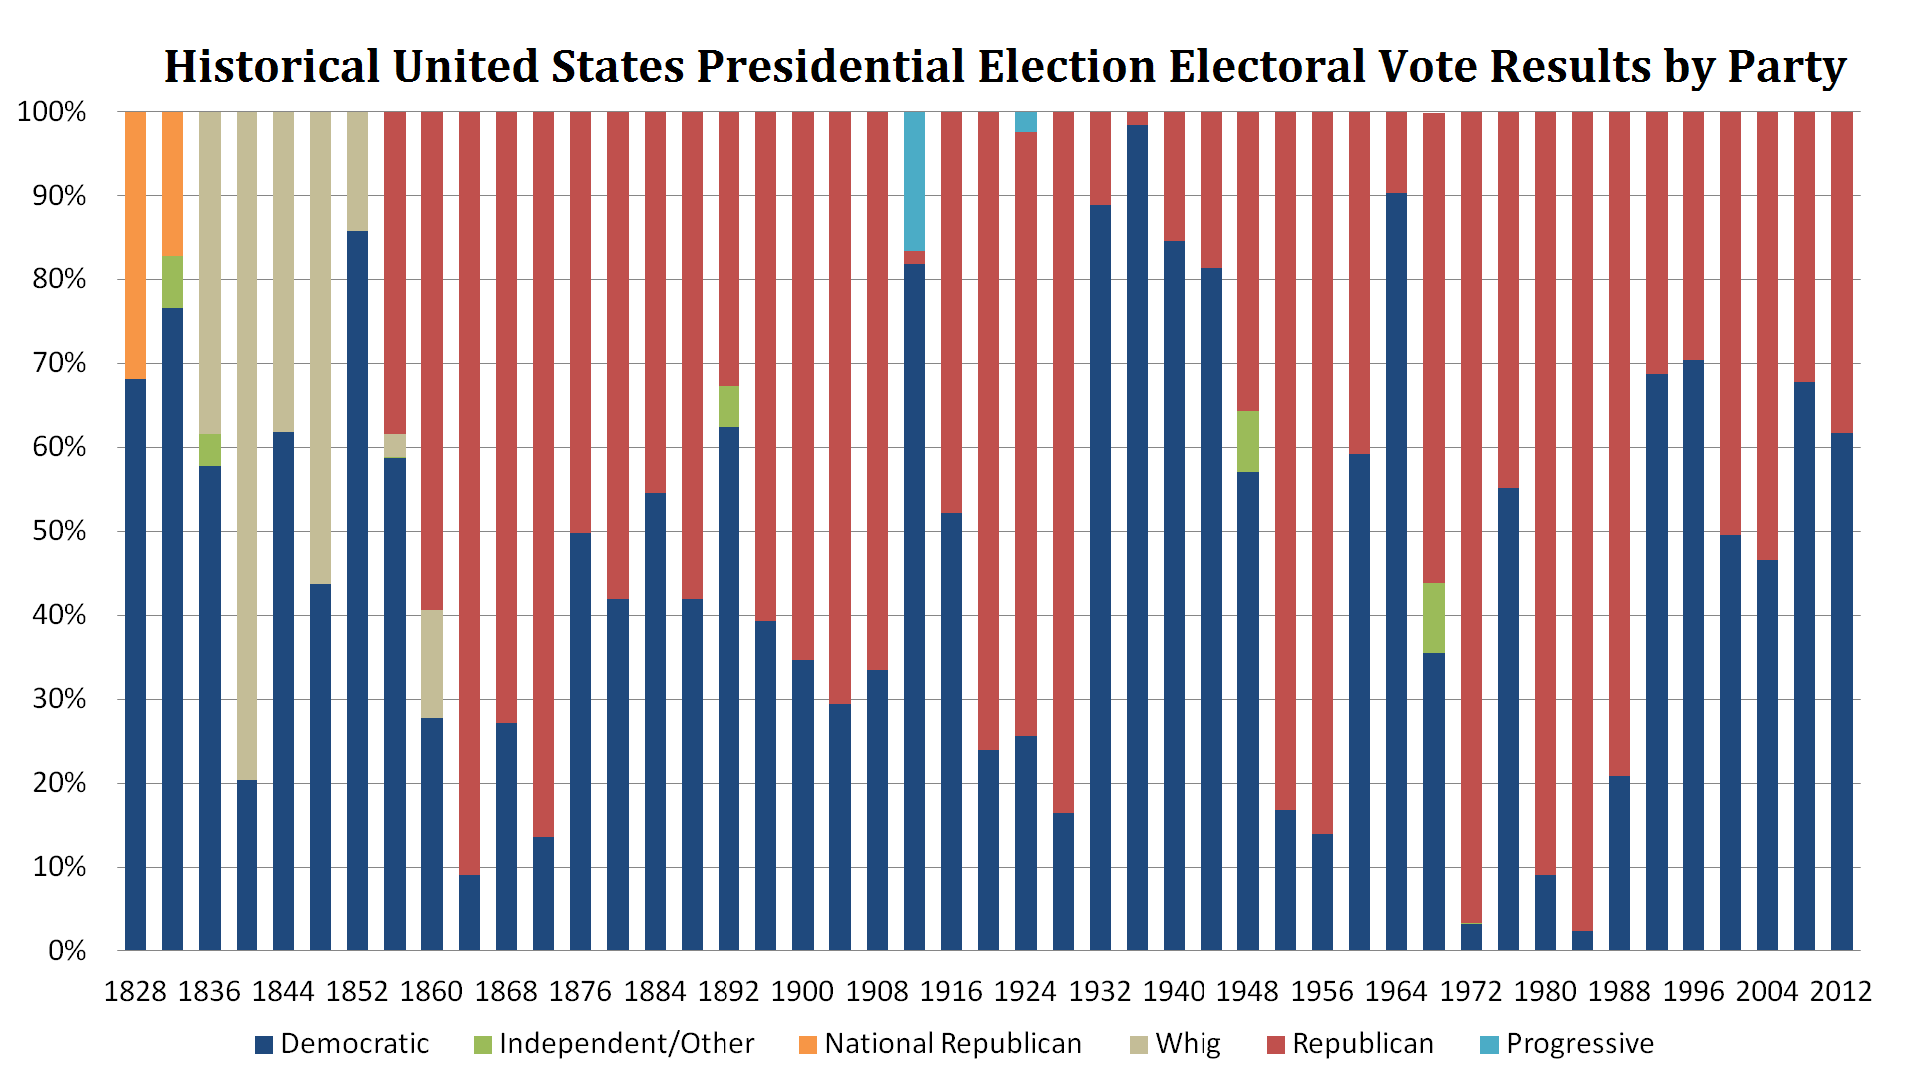 historical-united-states-presidential-election-electoral-vote-results-by-party.png